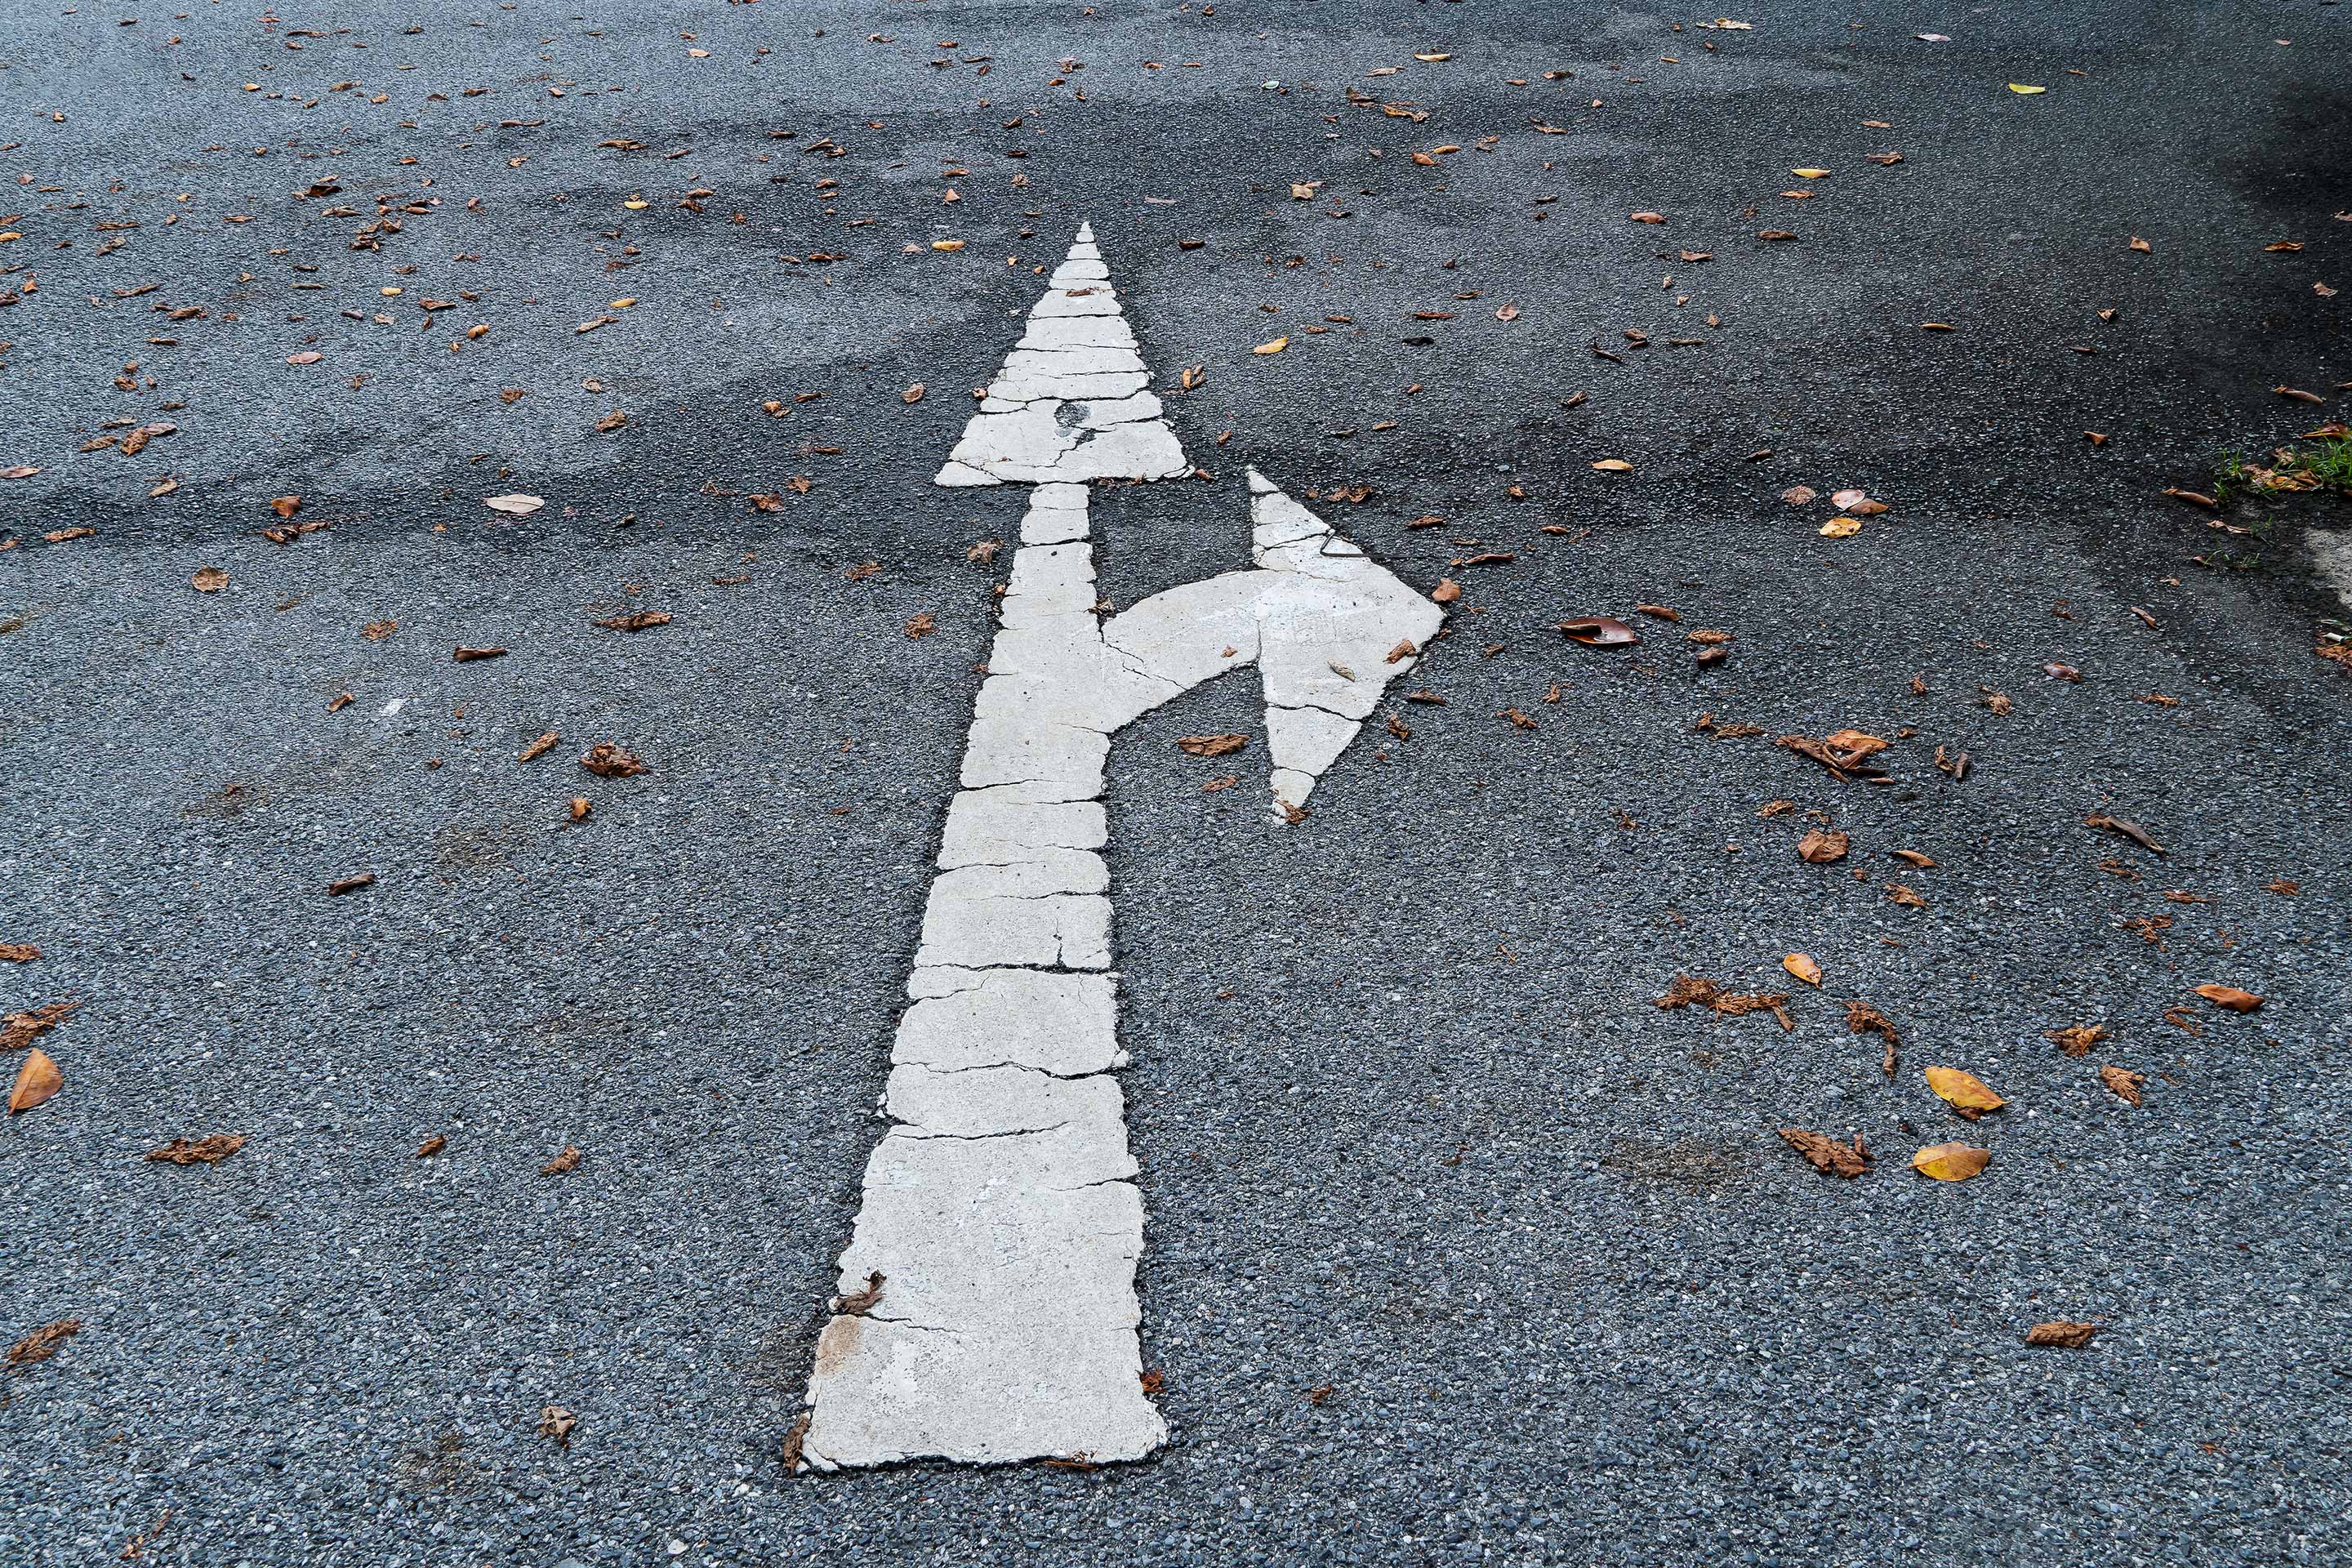 An image of a road with arrows pointing ahead and to the right, as a metaphor for considering investing goals